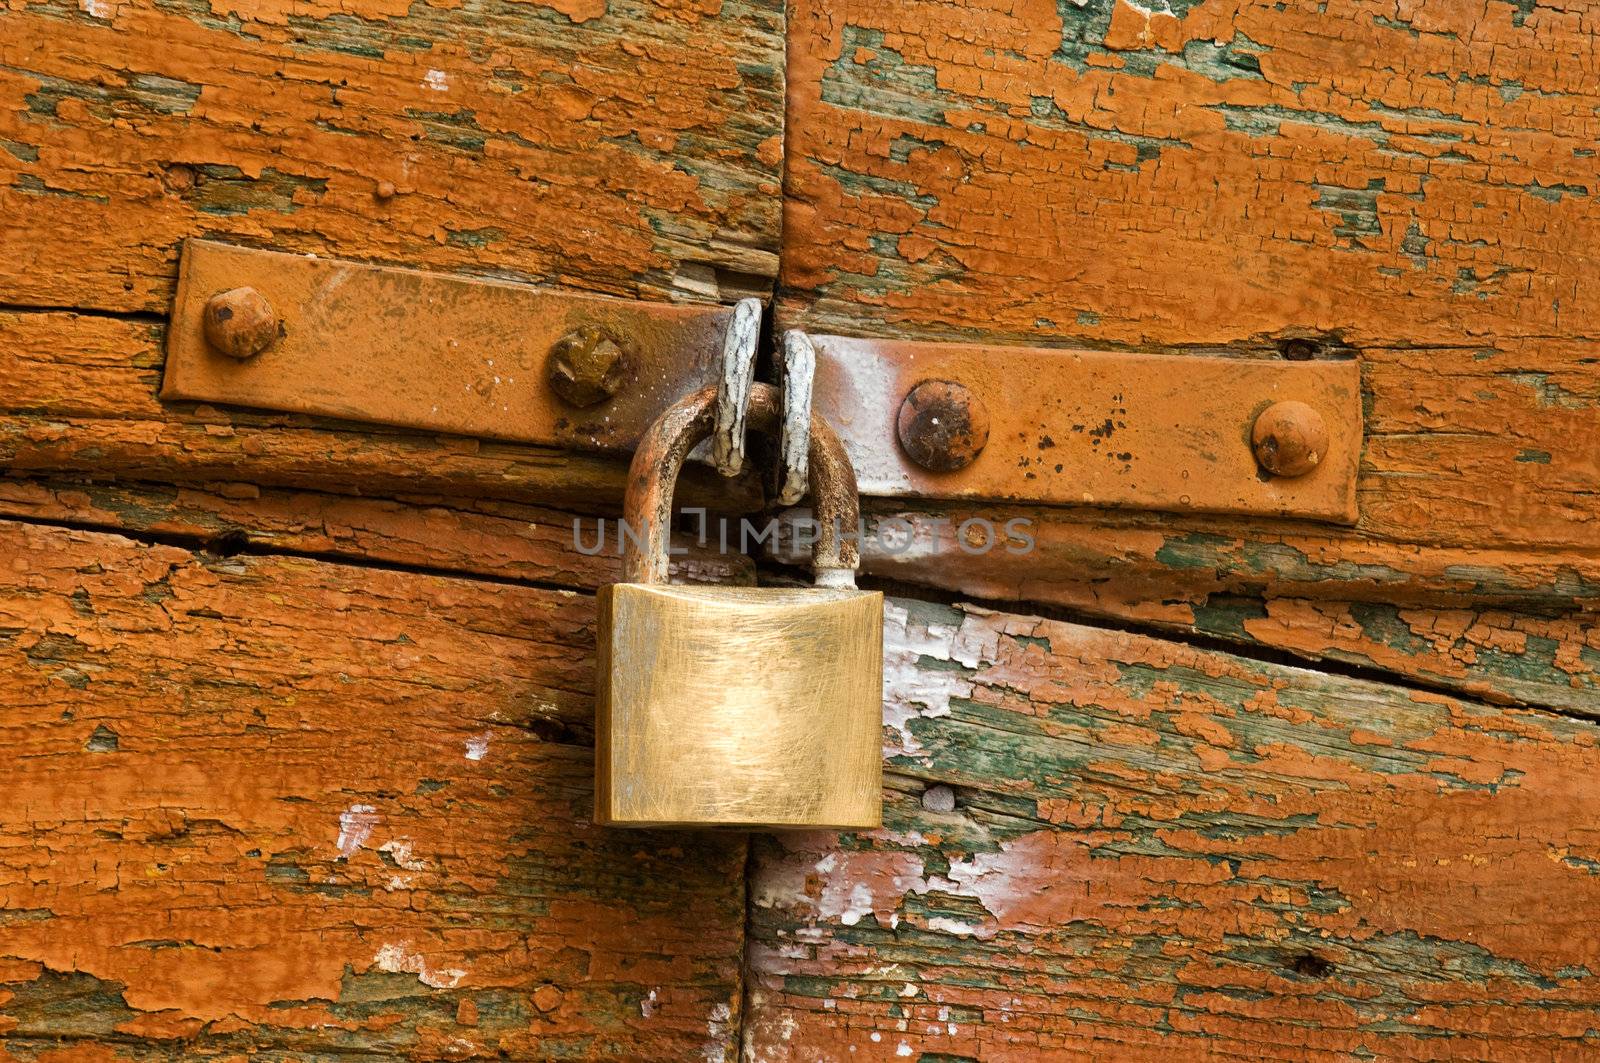 Image shows a padlock on a highly textured door